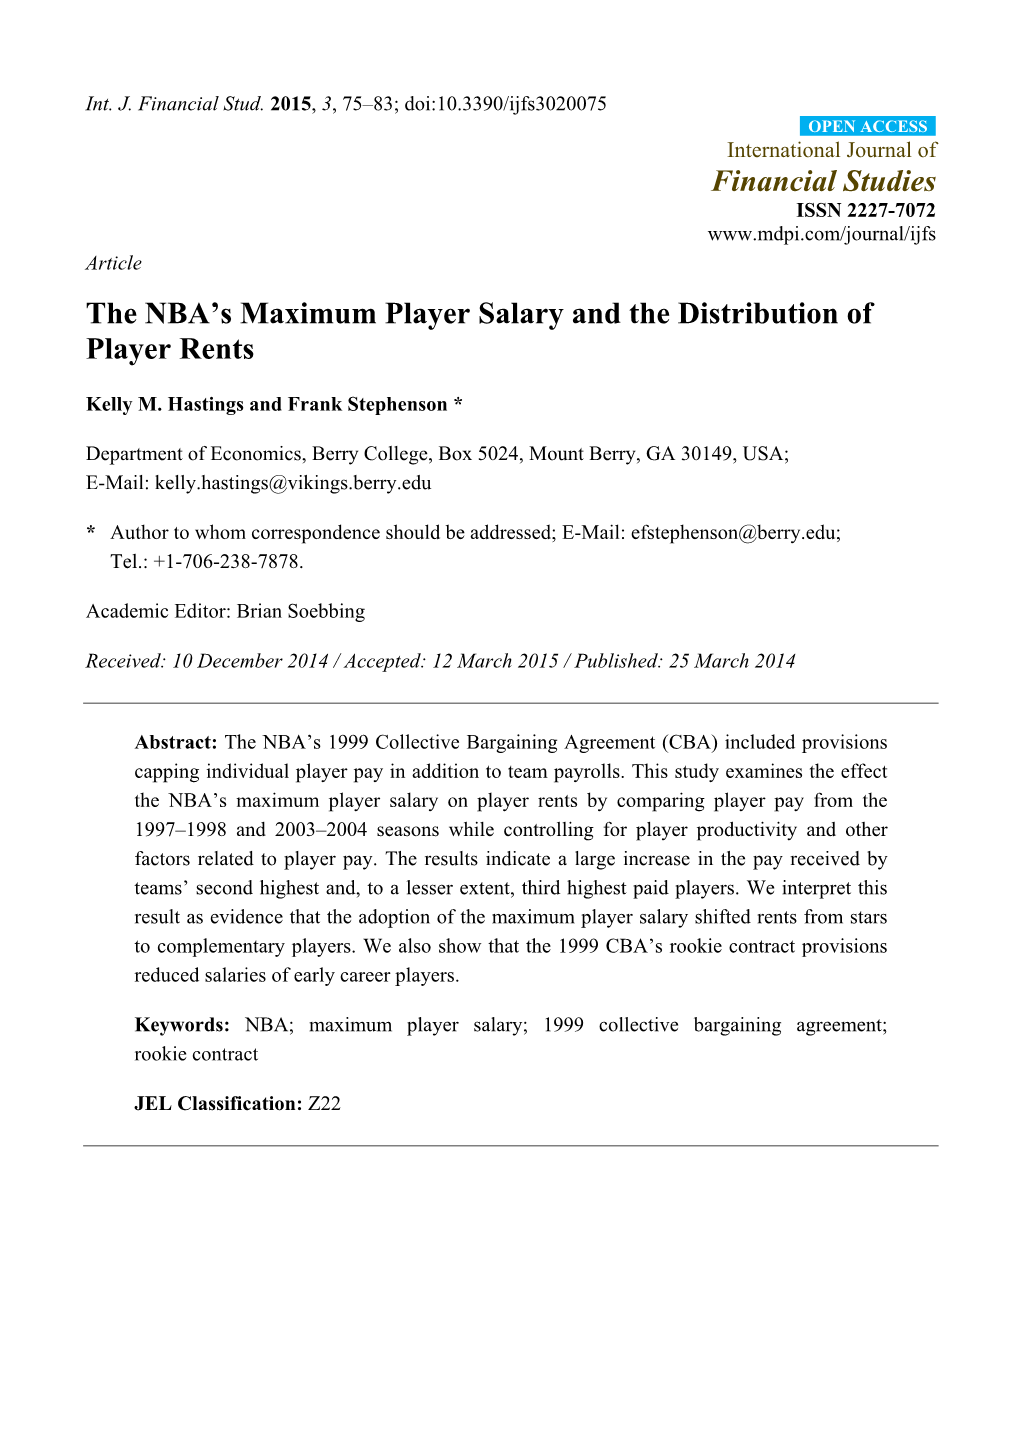 The NBA's Maximum Player Salary and the Distribution of Player Rents